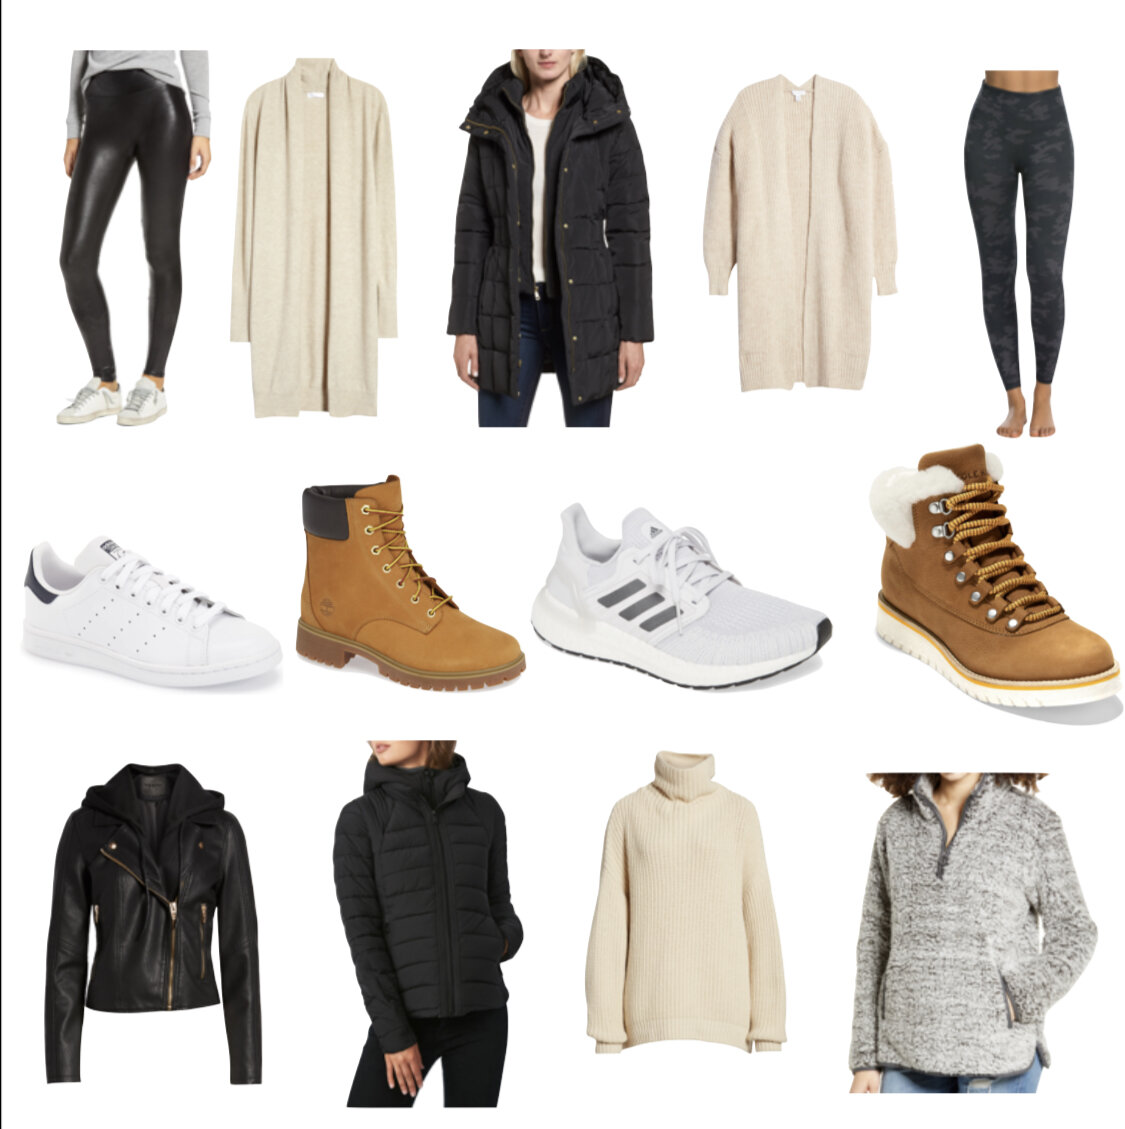 UP TO 50% OFF NORDSTROM BLACK FRIDAY